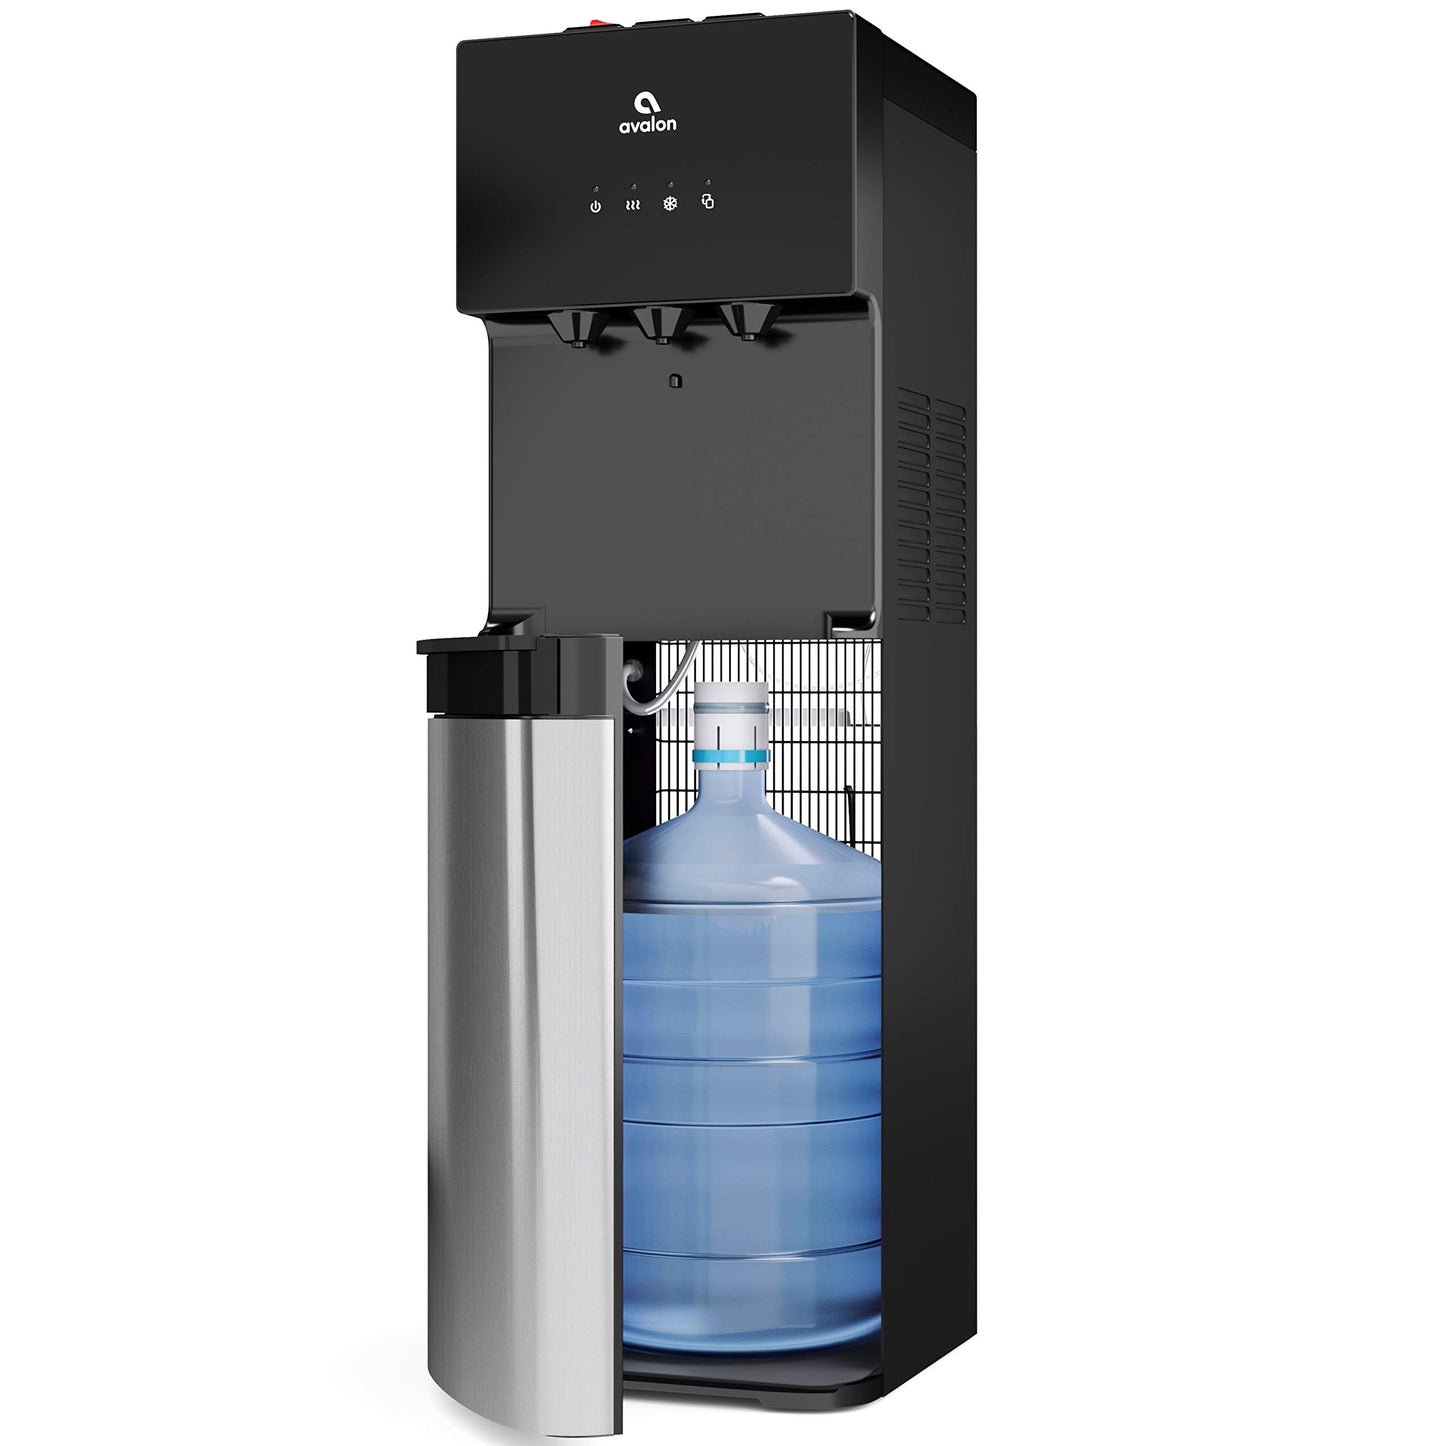 Avalon Bottom Loading Water Cooler Water Dispenser with BioGuard- 3 Temperature Settings - Hot, Cold & Room Water, Durable Stainless Steel Construction, Anti-Microbial Coating- UL Listed